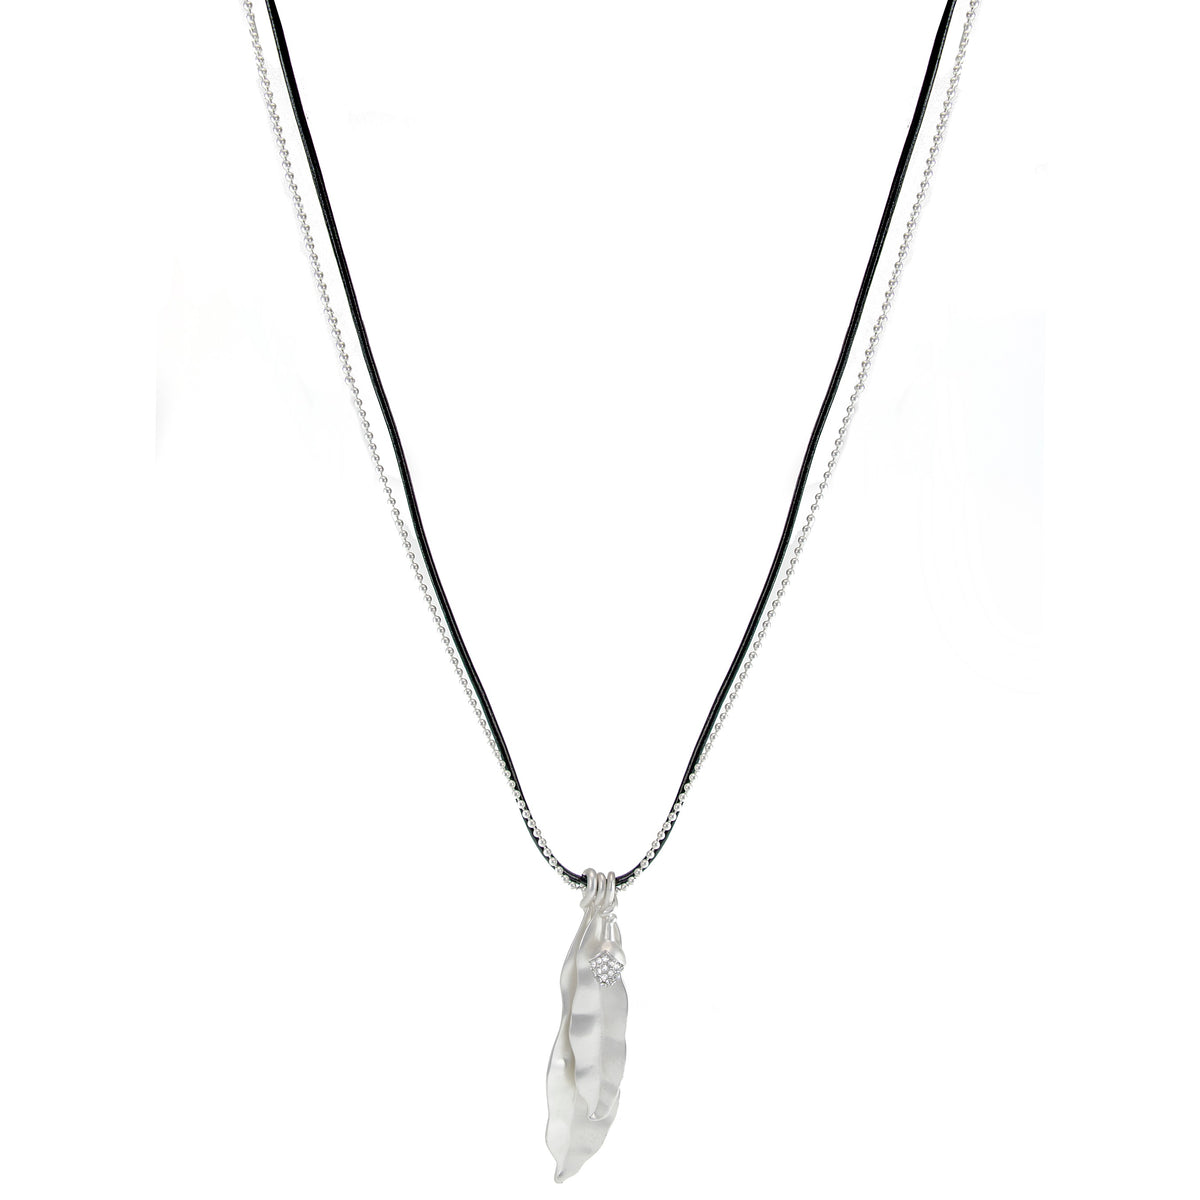 Merx fashion jewellery necklace. Matt Silver with  Crystal Accent 